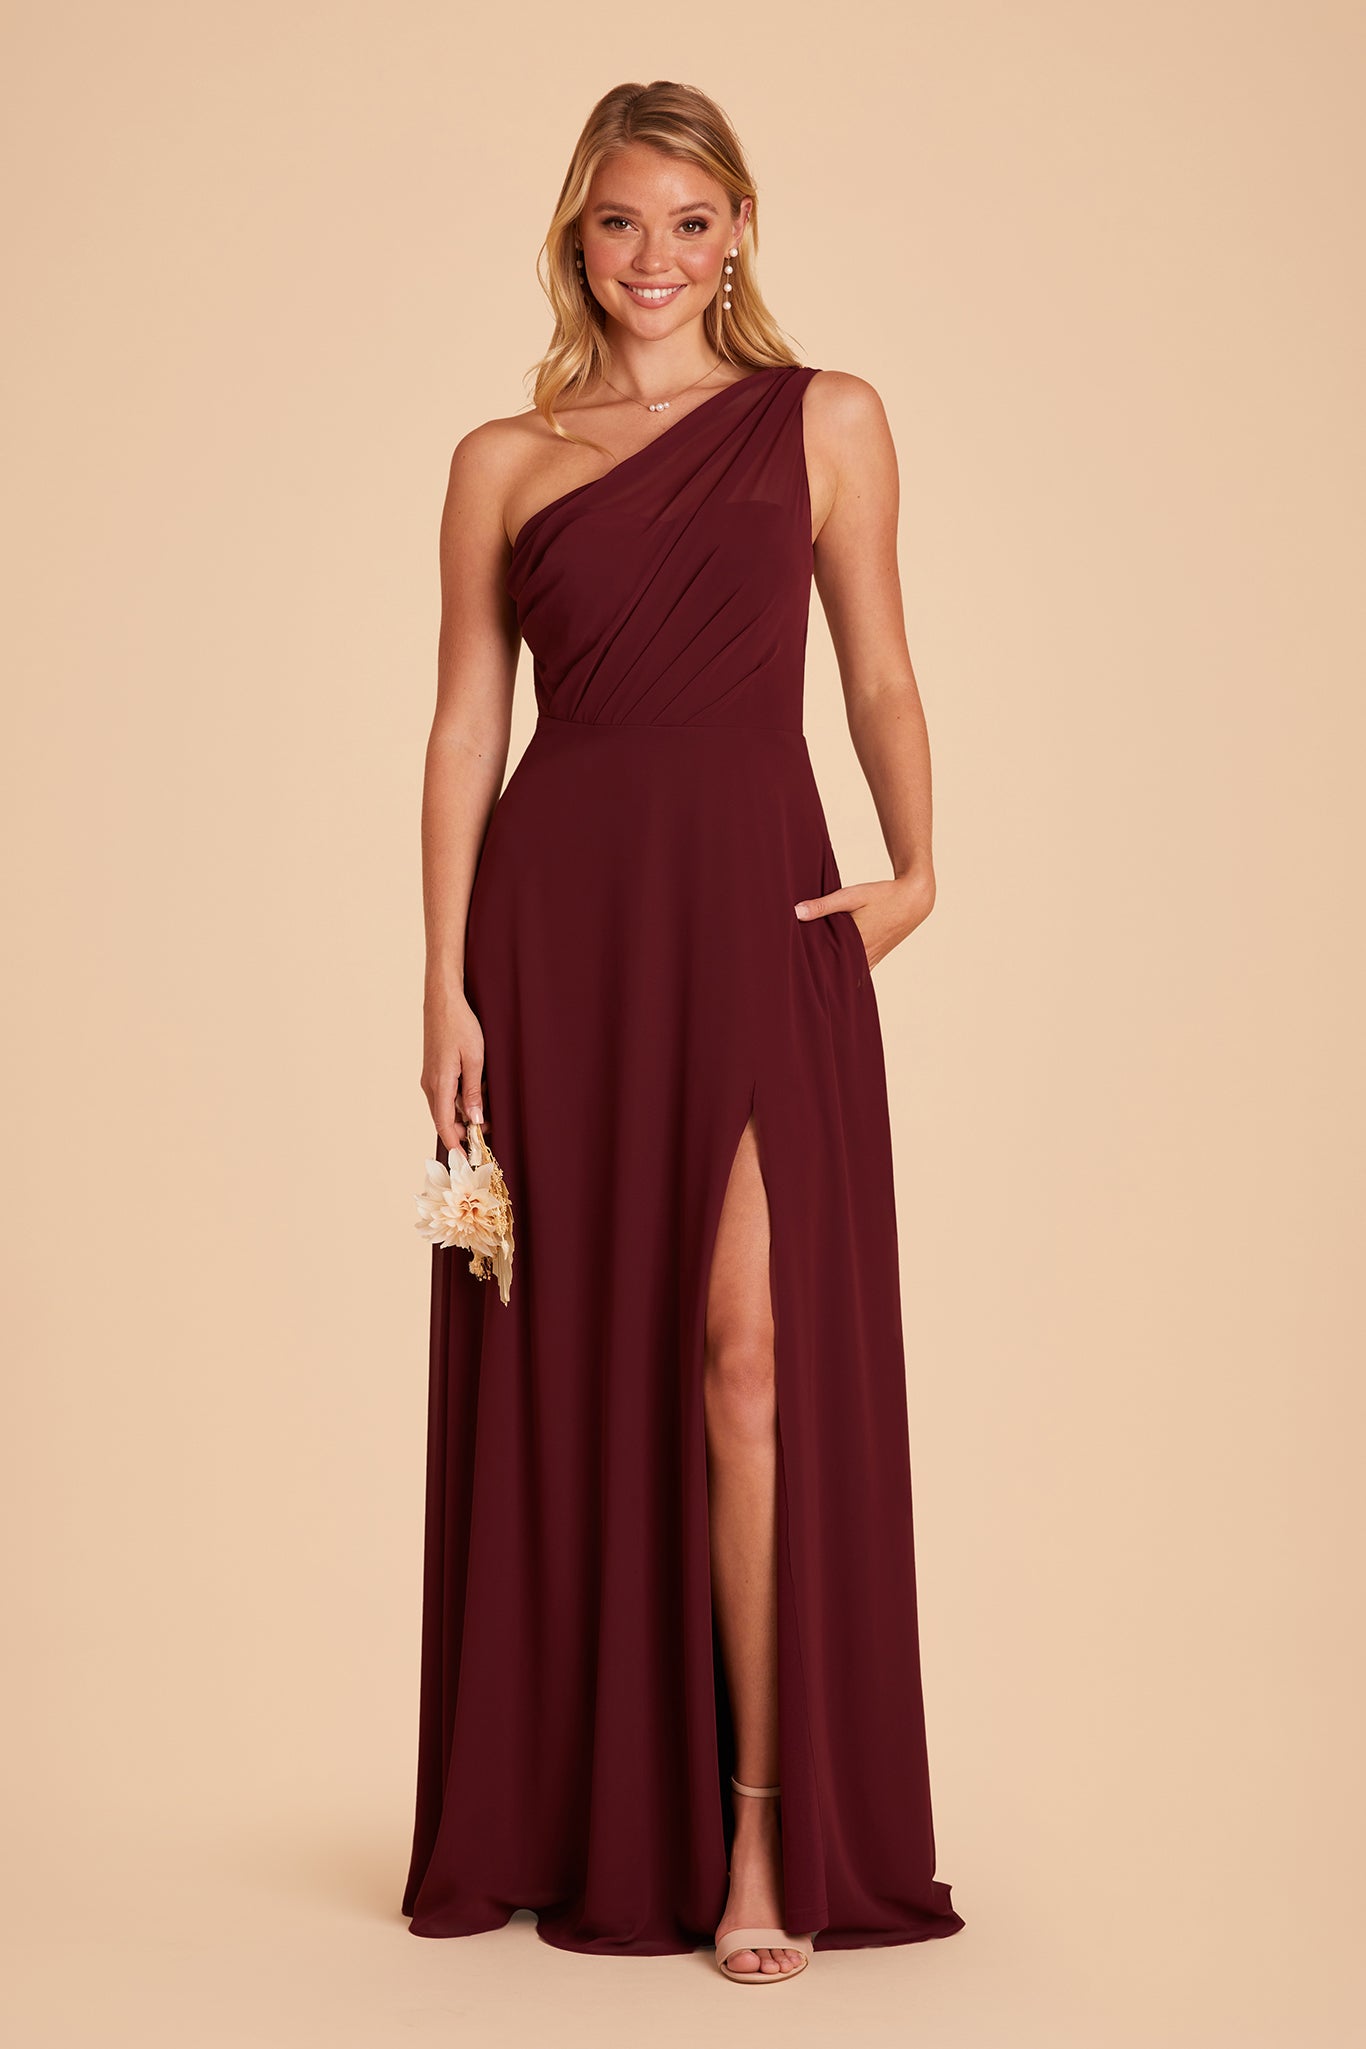 Front view of the Kira Dress in cabernet chiffon shows a slender model with a light skin tone with their hand tucked into their left pocket revealing their leg and sandled foot through the dress slit. The model wears the Mary High Chunky Heel shoe in nude blush.